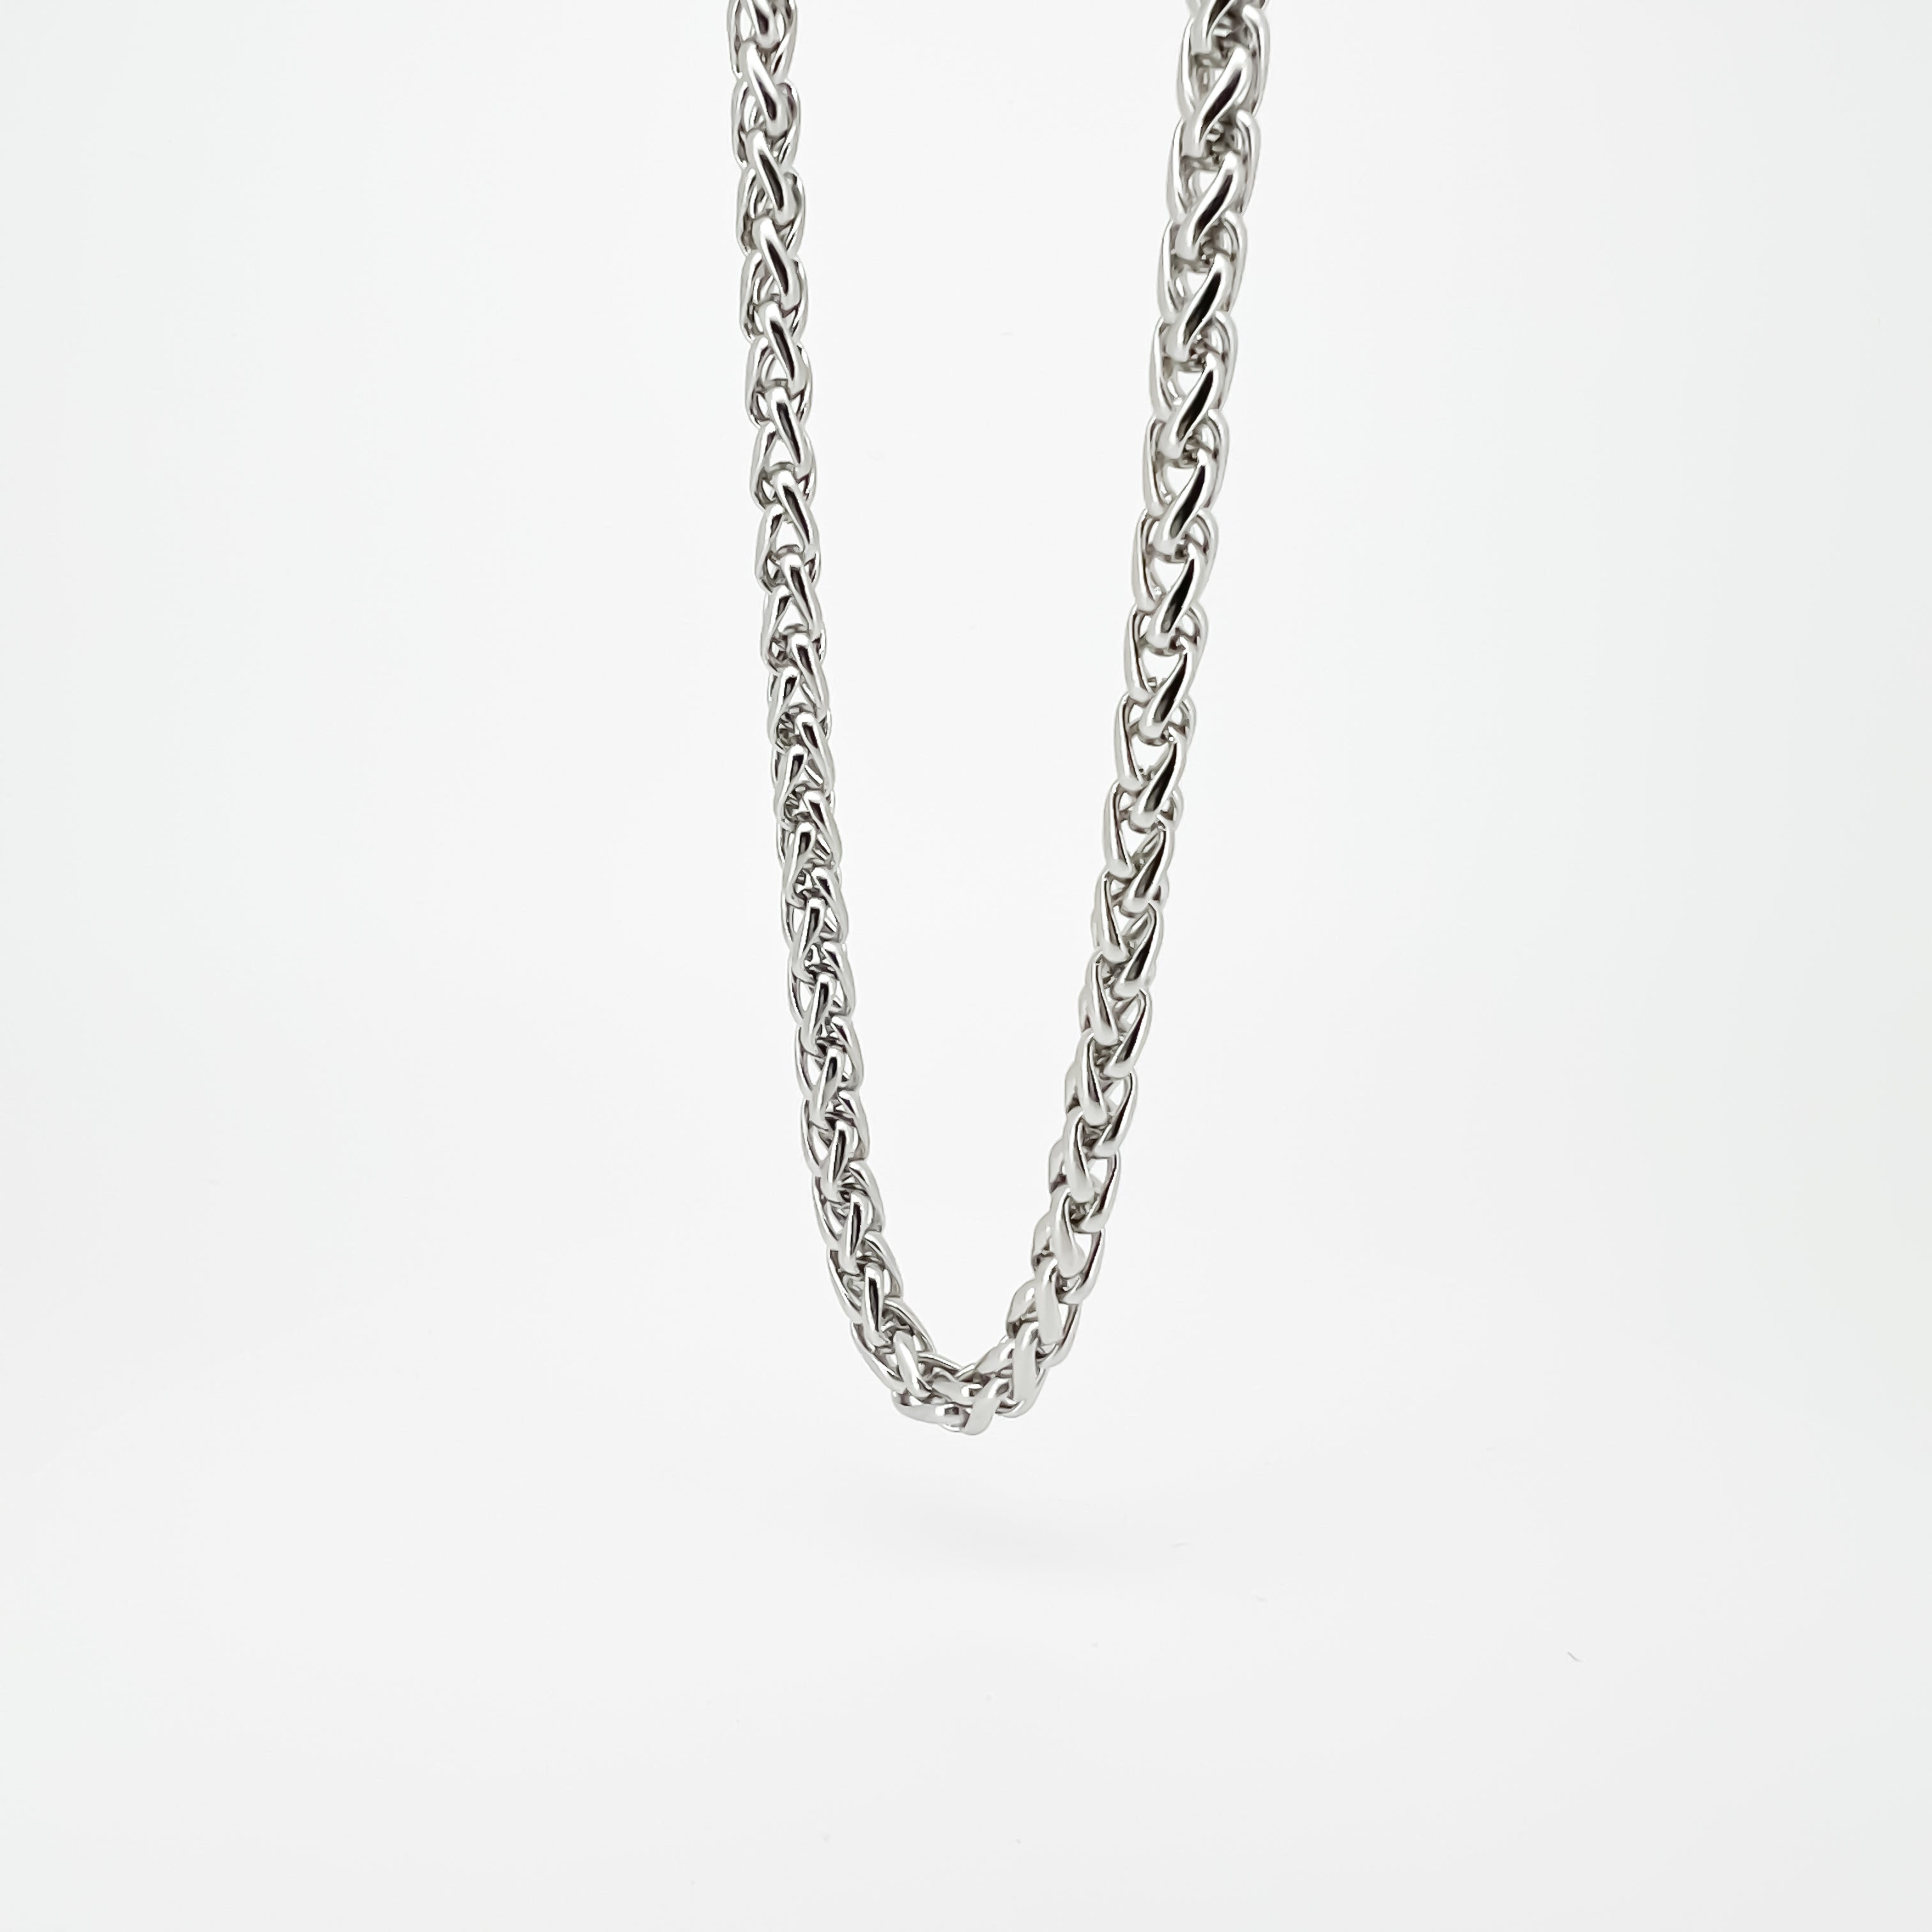 Rahul Stainless Steel Wheat Chain link Necklace